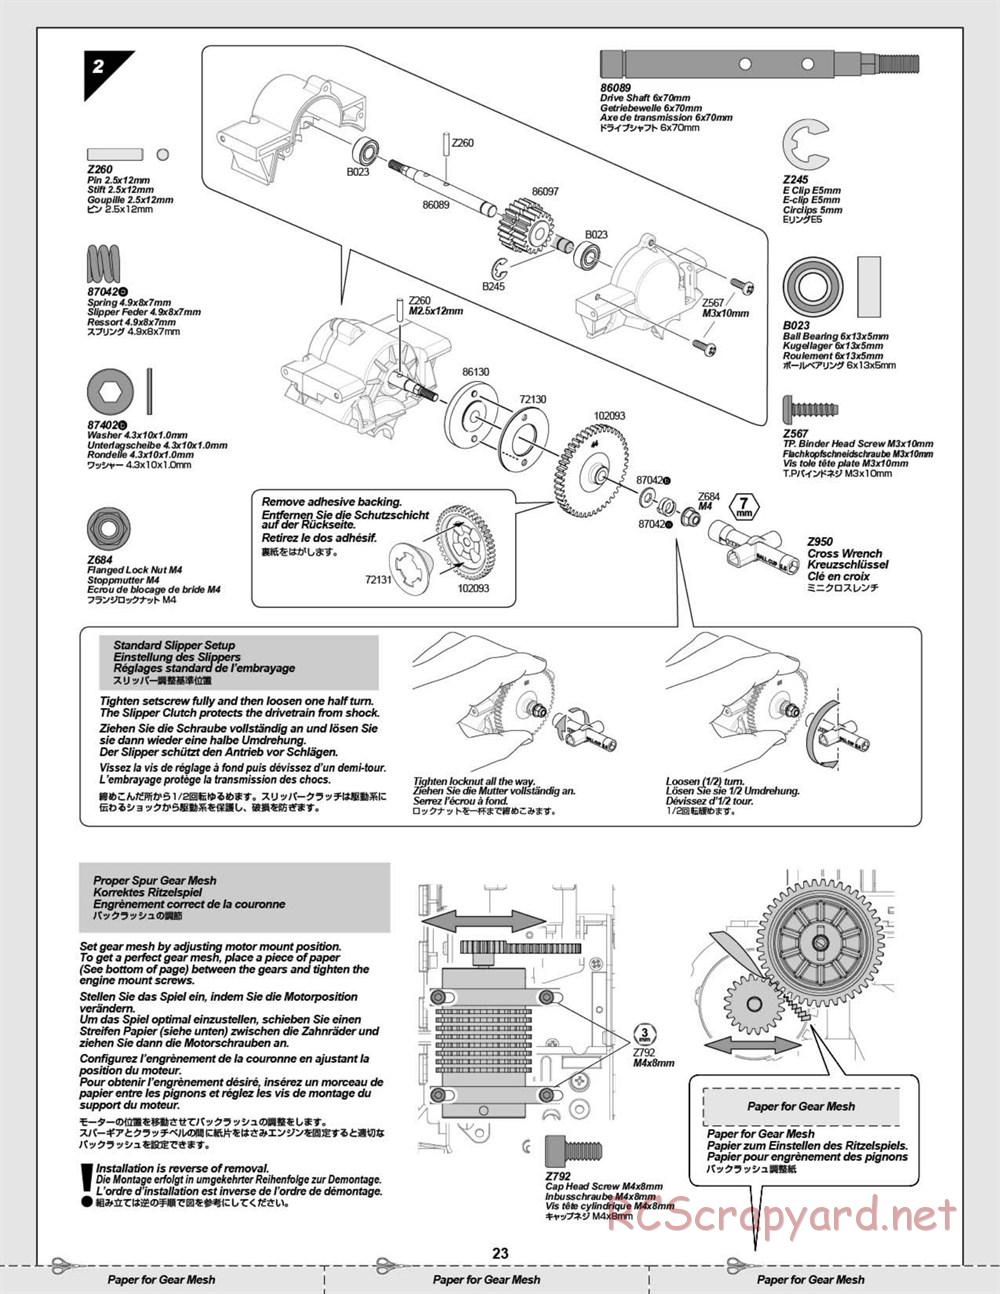 HPI - Savage Flux HP - Manual - Page 23